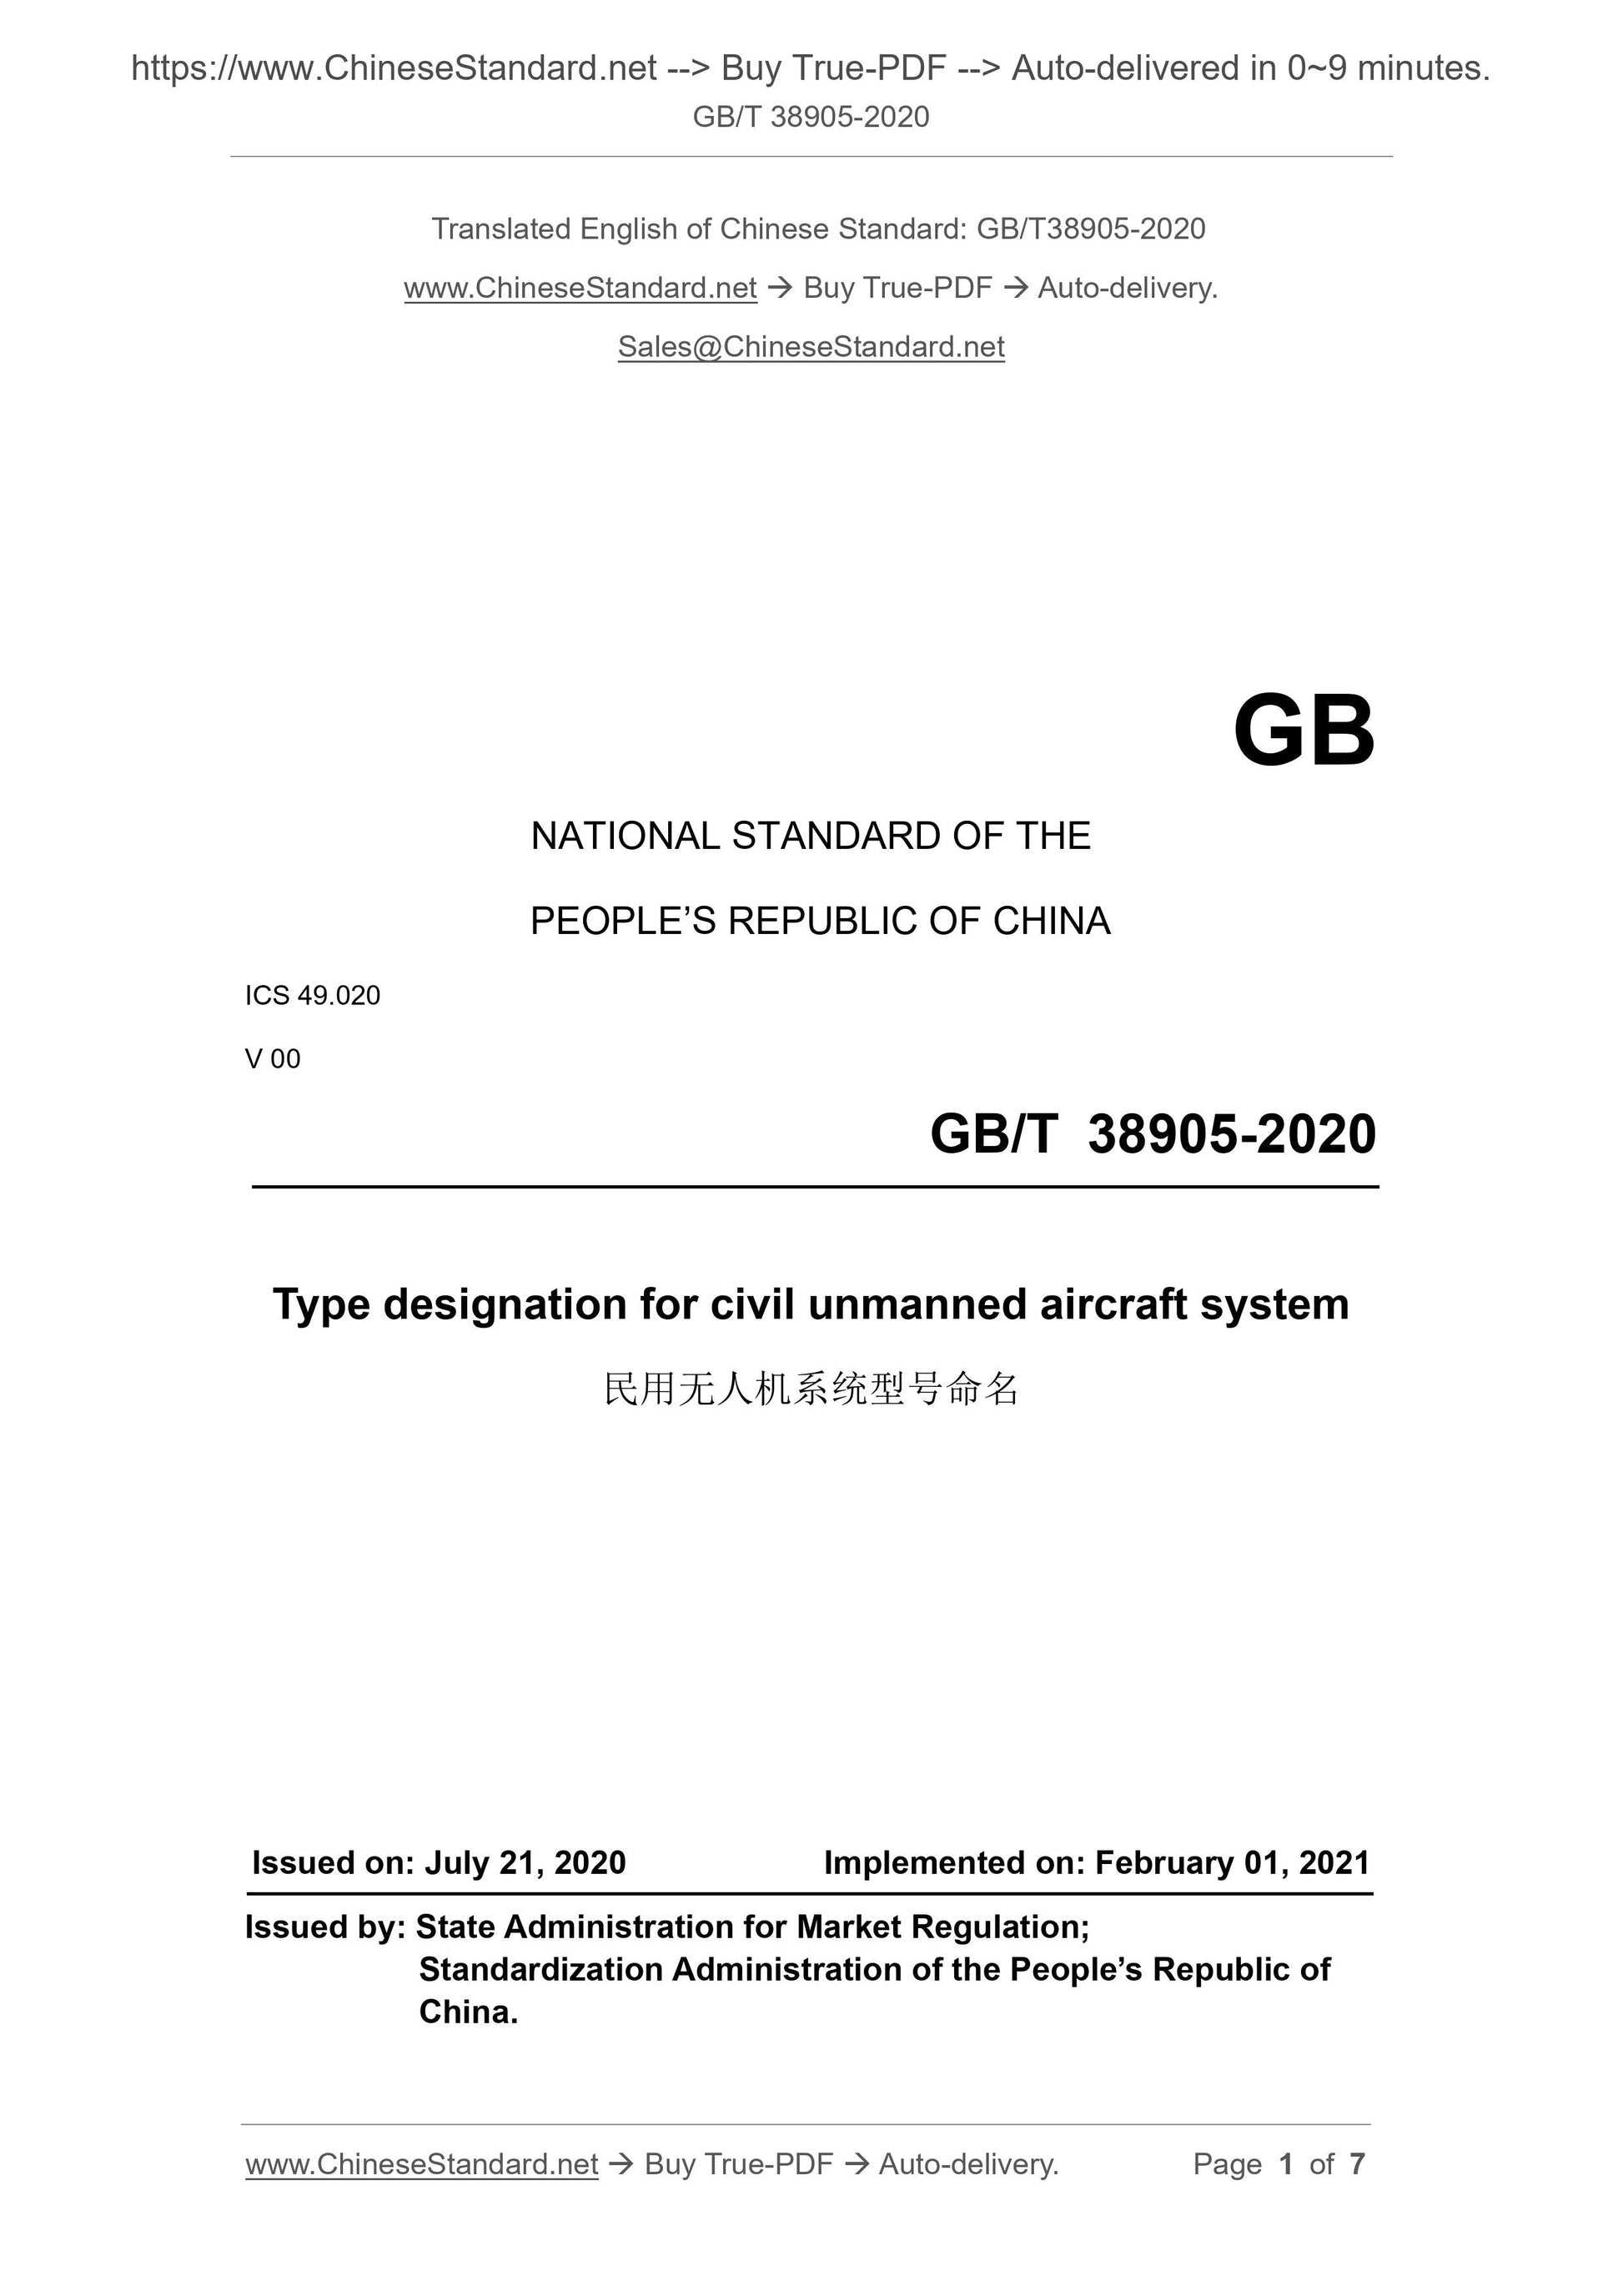 GB/T 38905-2020 Page 1